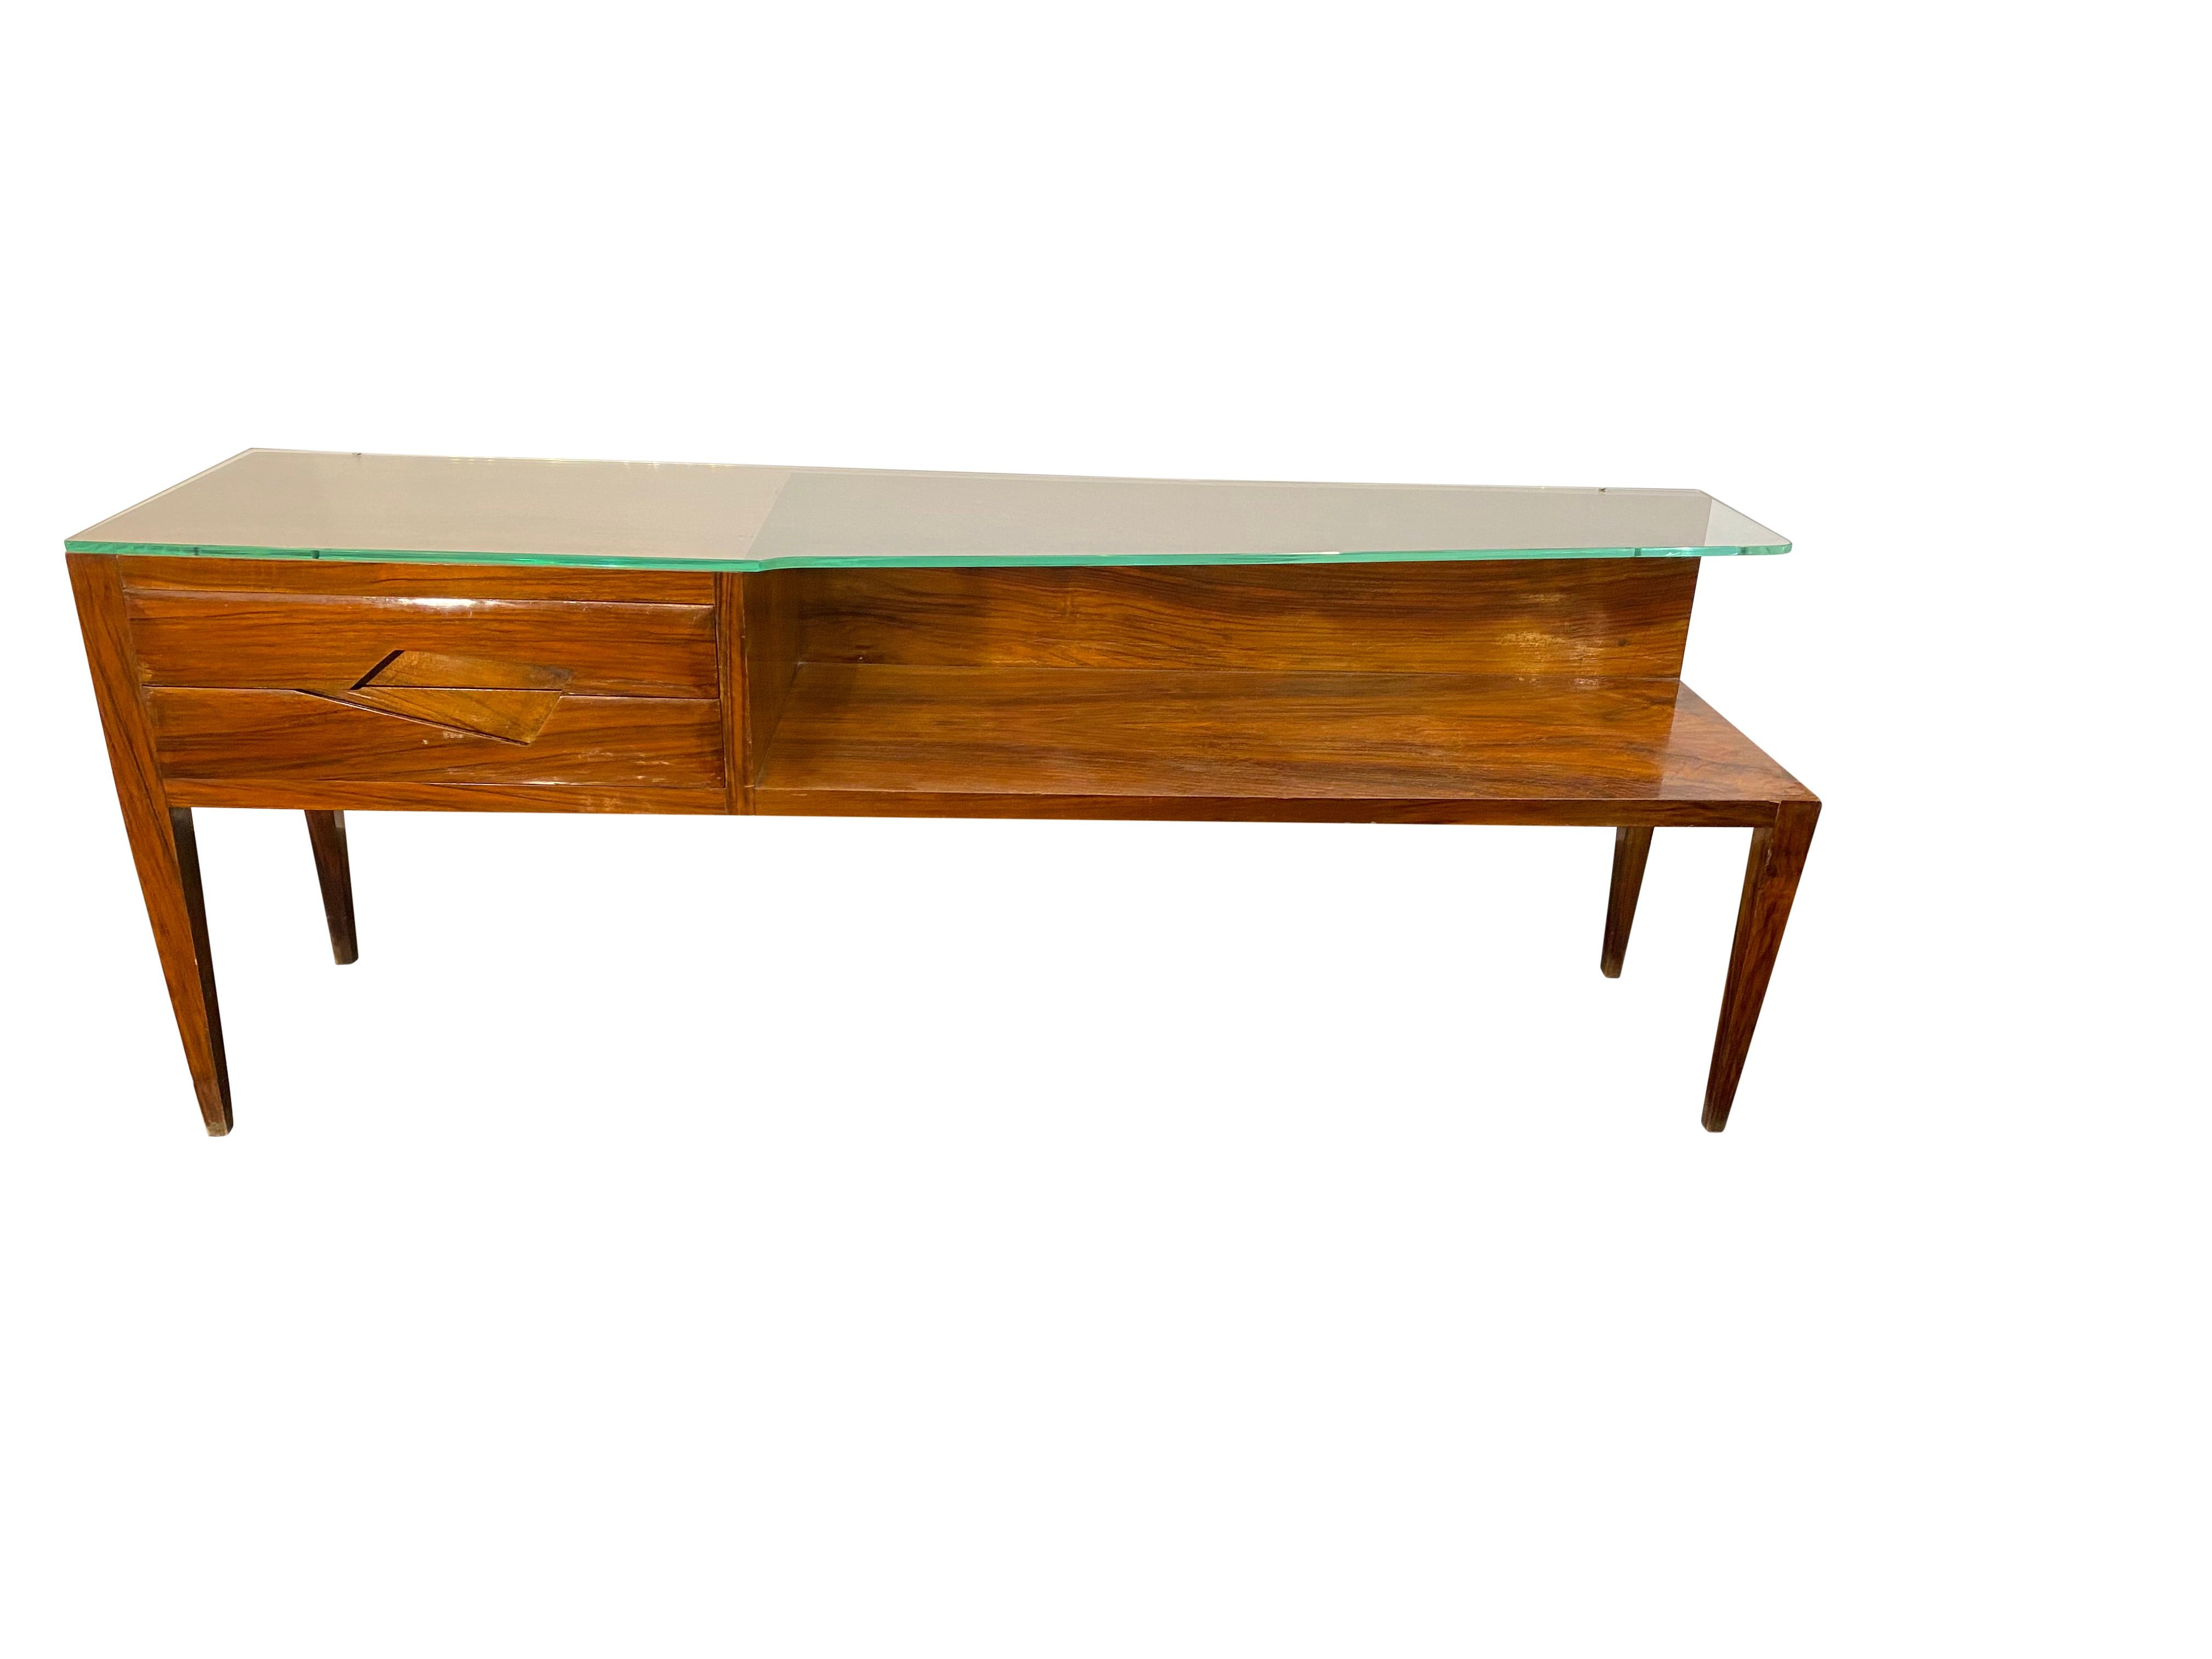 An architectural low Italian console table in cherrywood and angular glass featuring 2 single drawers and a shelf for display.

  